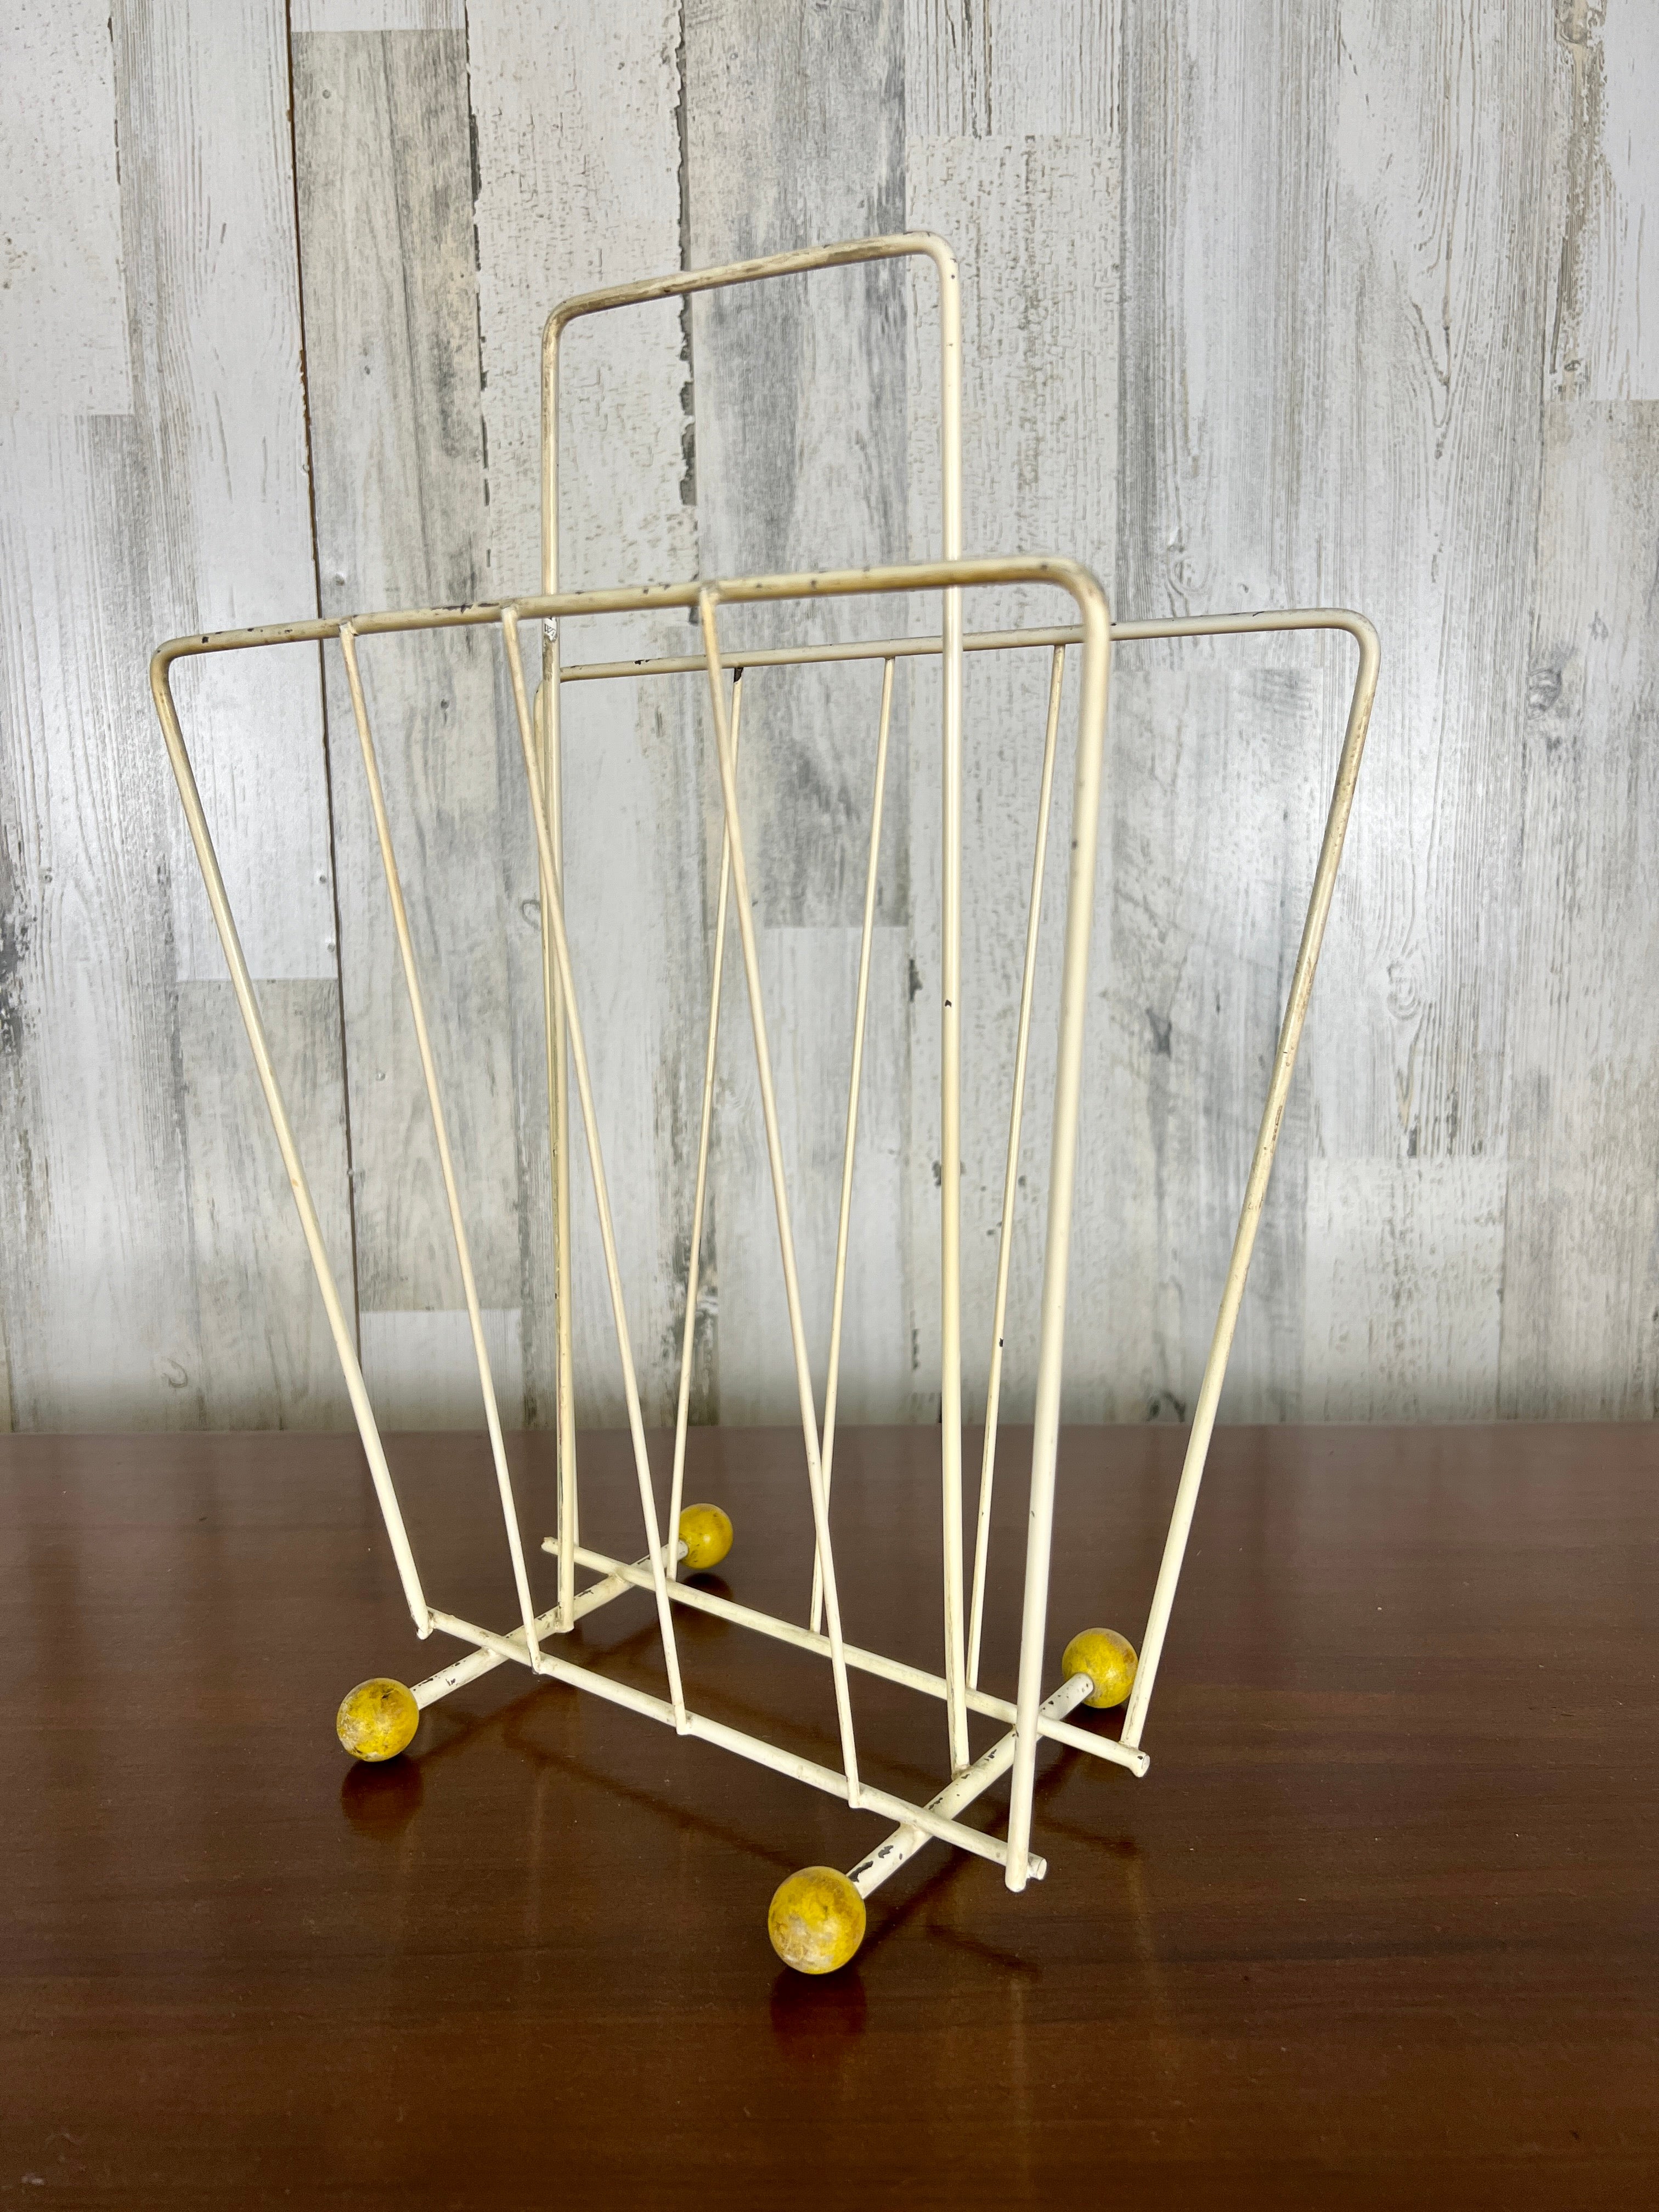 Modernist lacquered metal with wood ball feet magazine rack very space age.